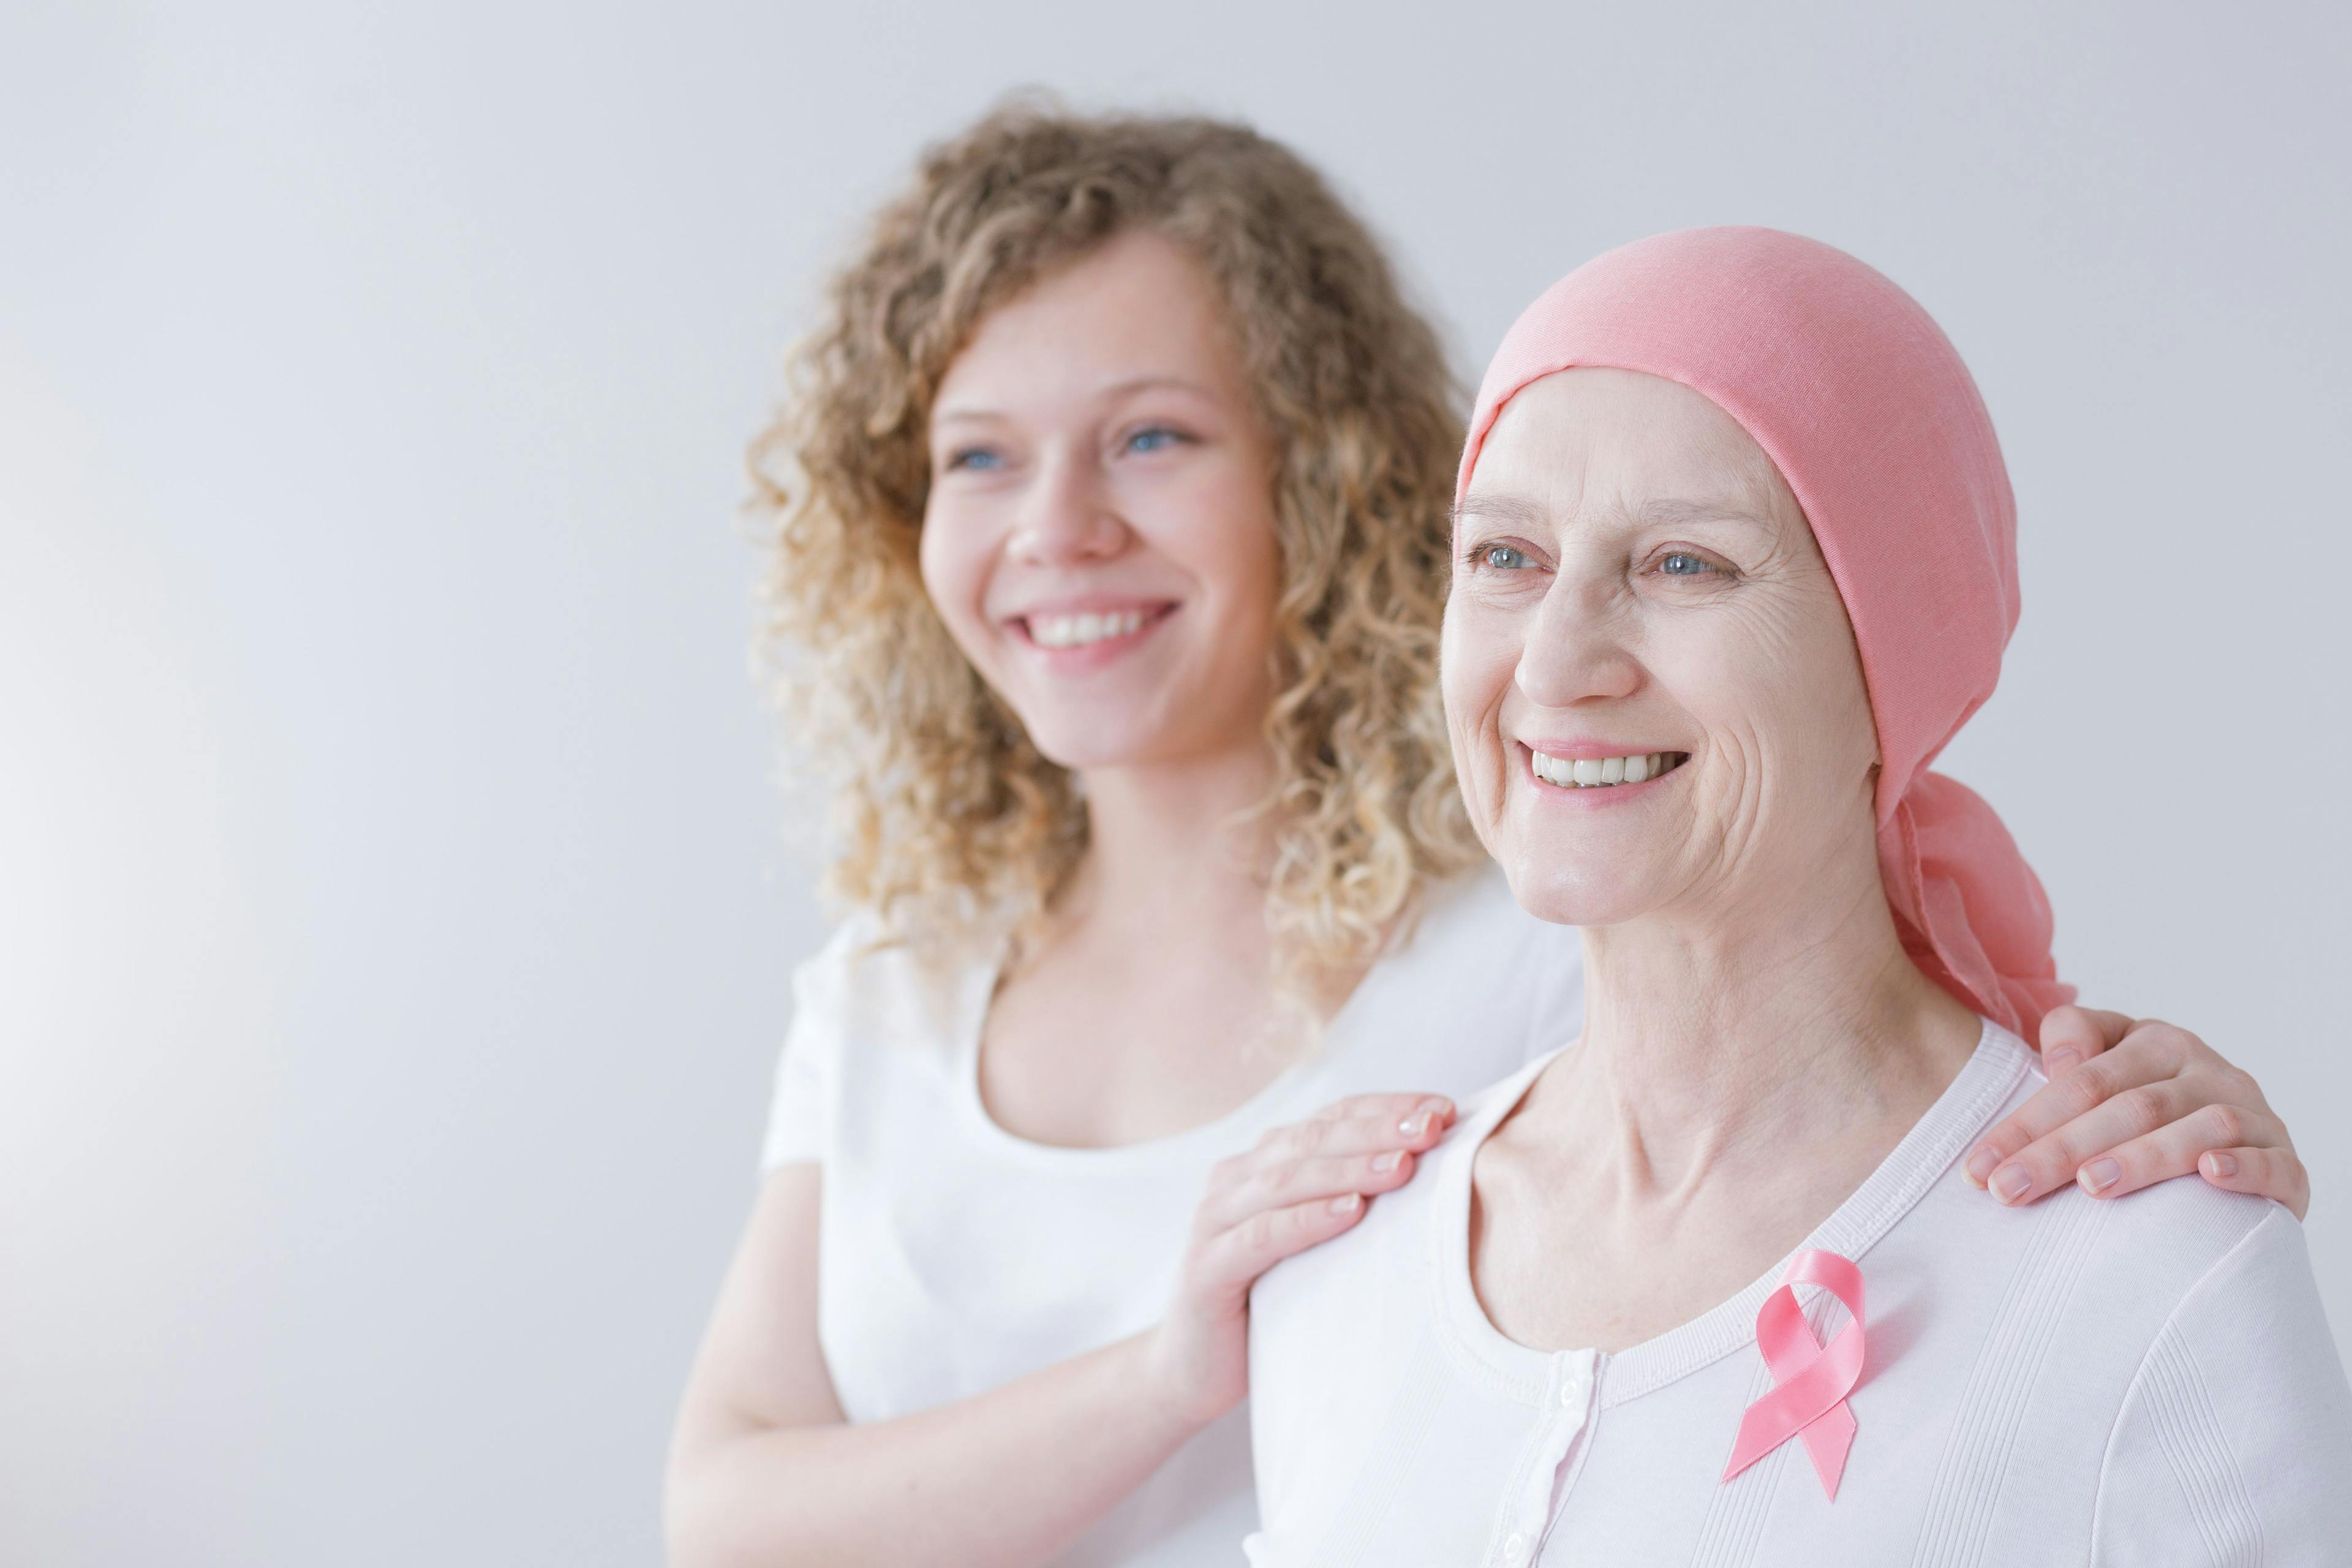 2 women with pink ribbons for breast cancer standing next to each other